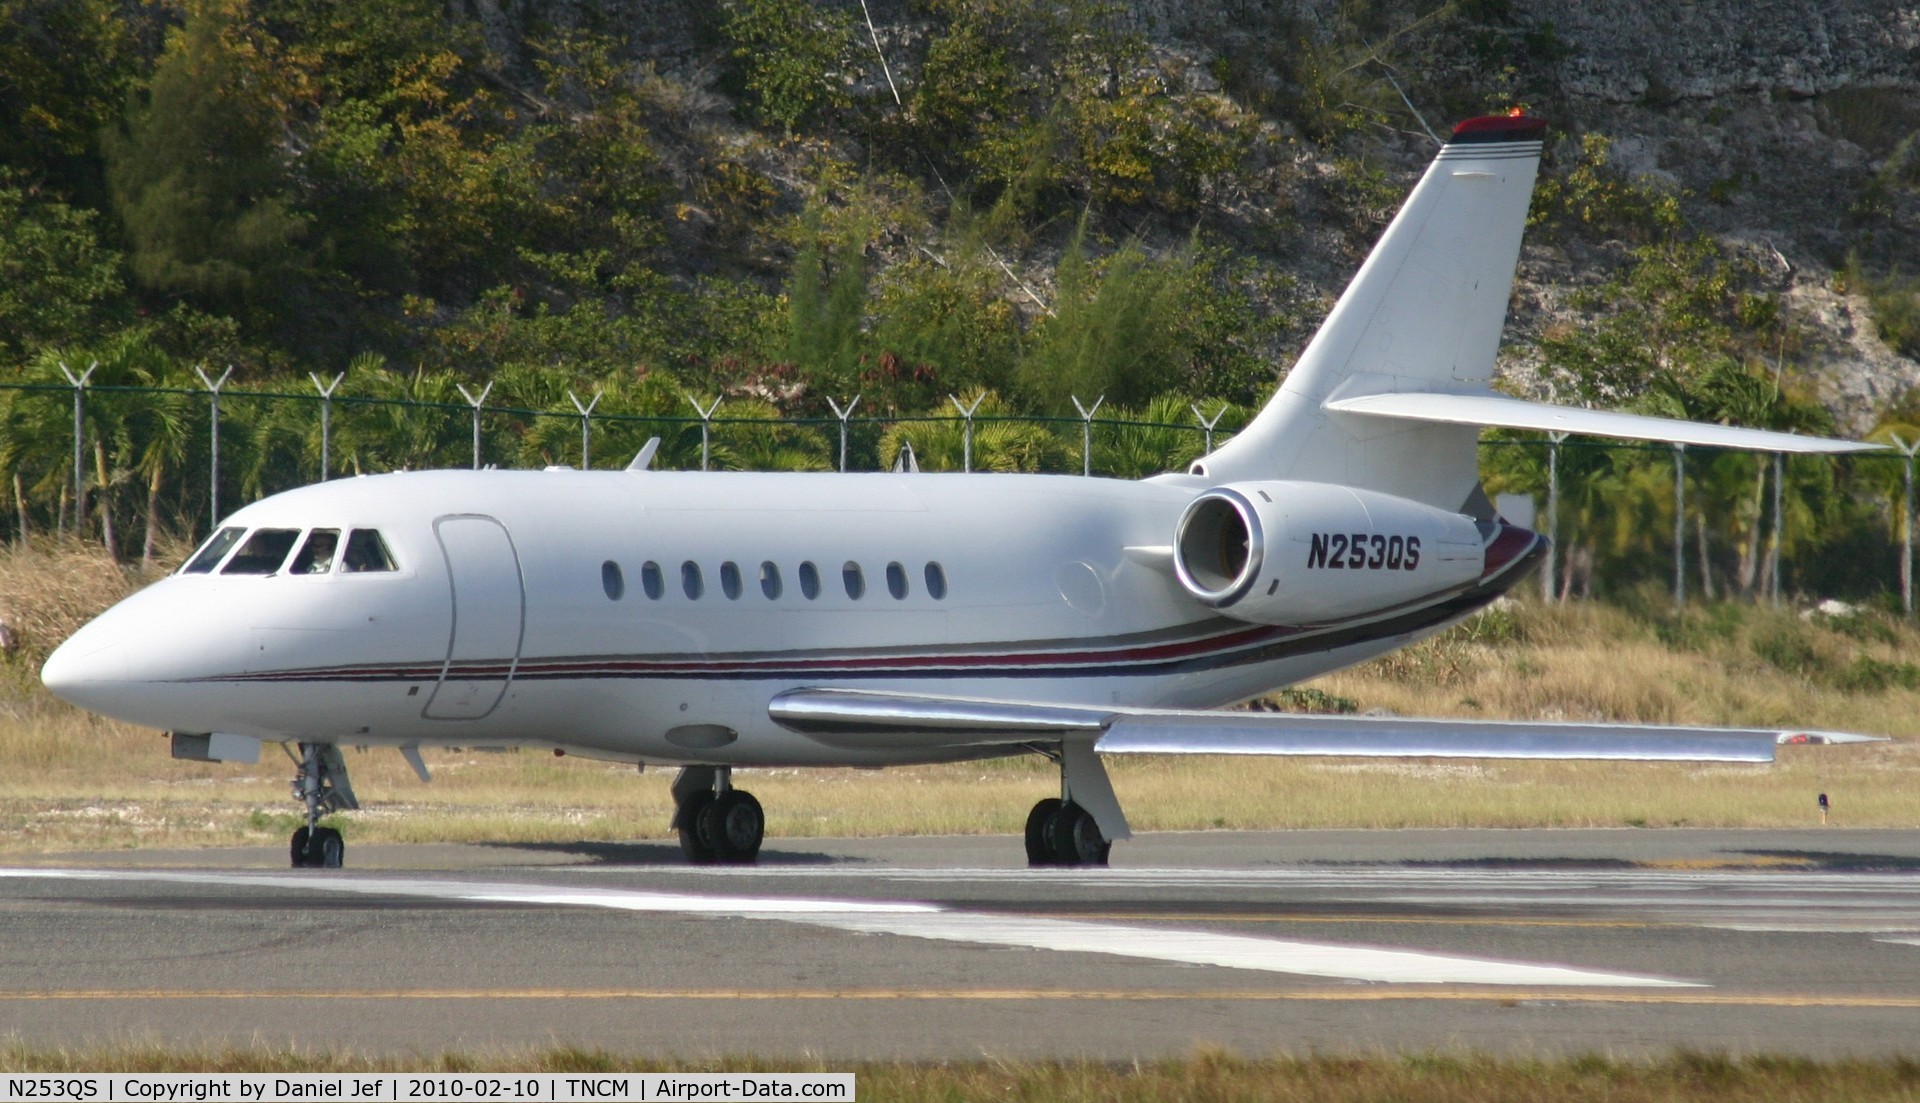 N253QS, 2001 Dassault Falcon 2000 C/N 153, N253QS taxing to the tresh hold for departure at TNCM